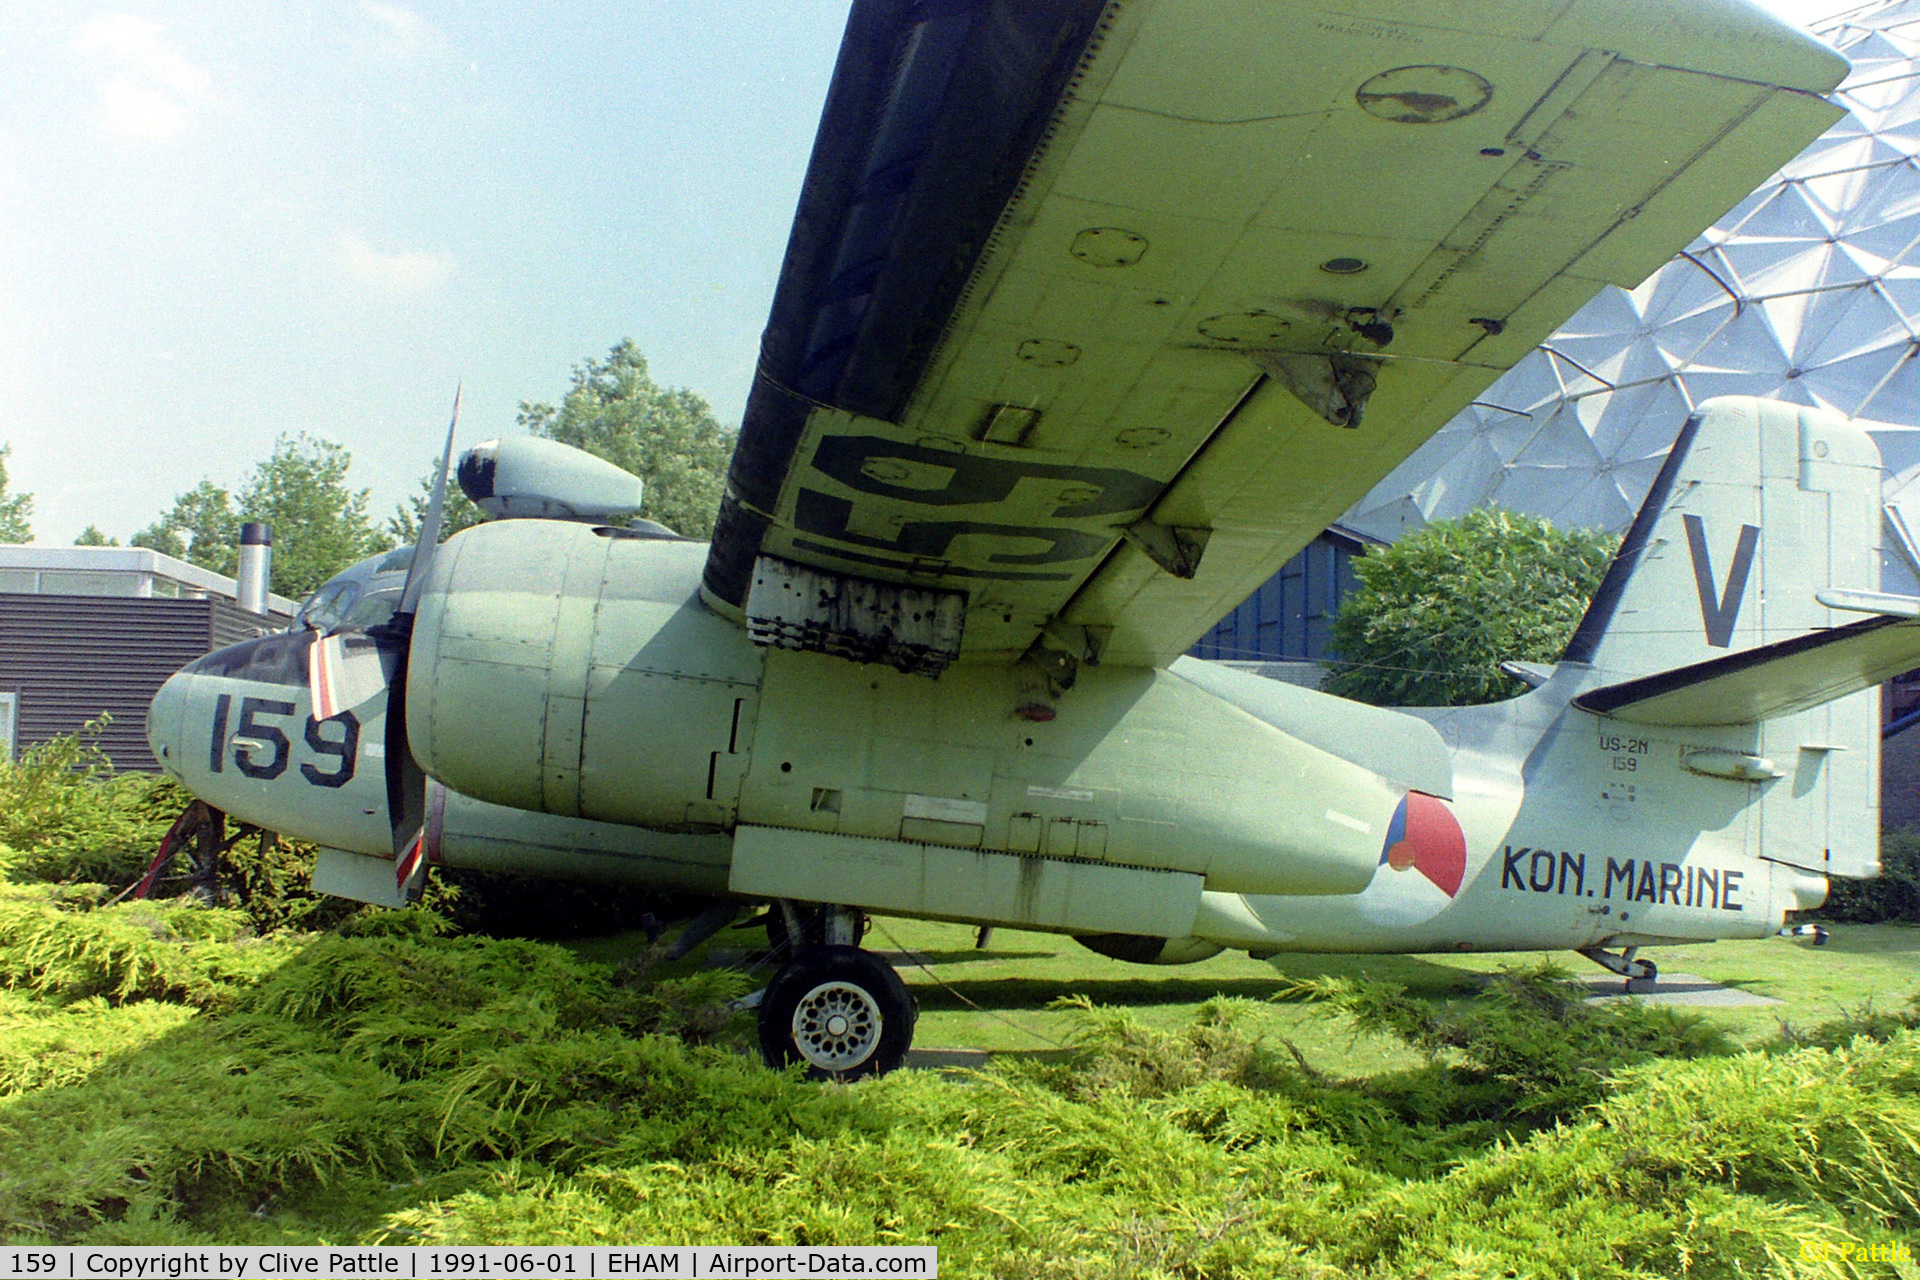 159, Grumman US-2N Tracker C/N 720, Pictured at the Aviodome Museum then situated at Schipol Airport, Amsterdam before its move to Lelystad in 2001 and subsequent deterioration.